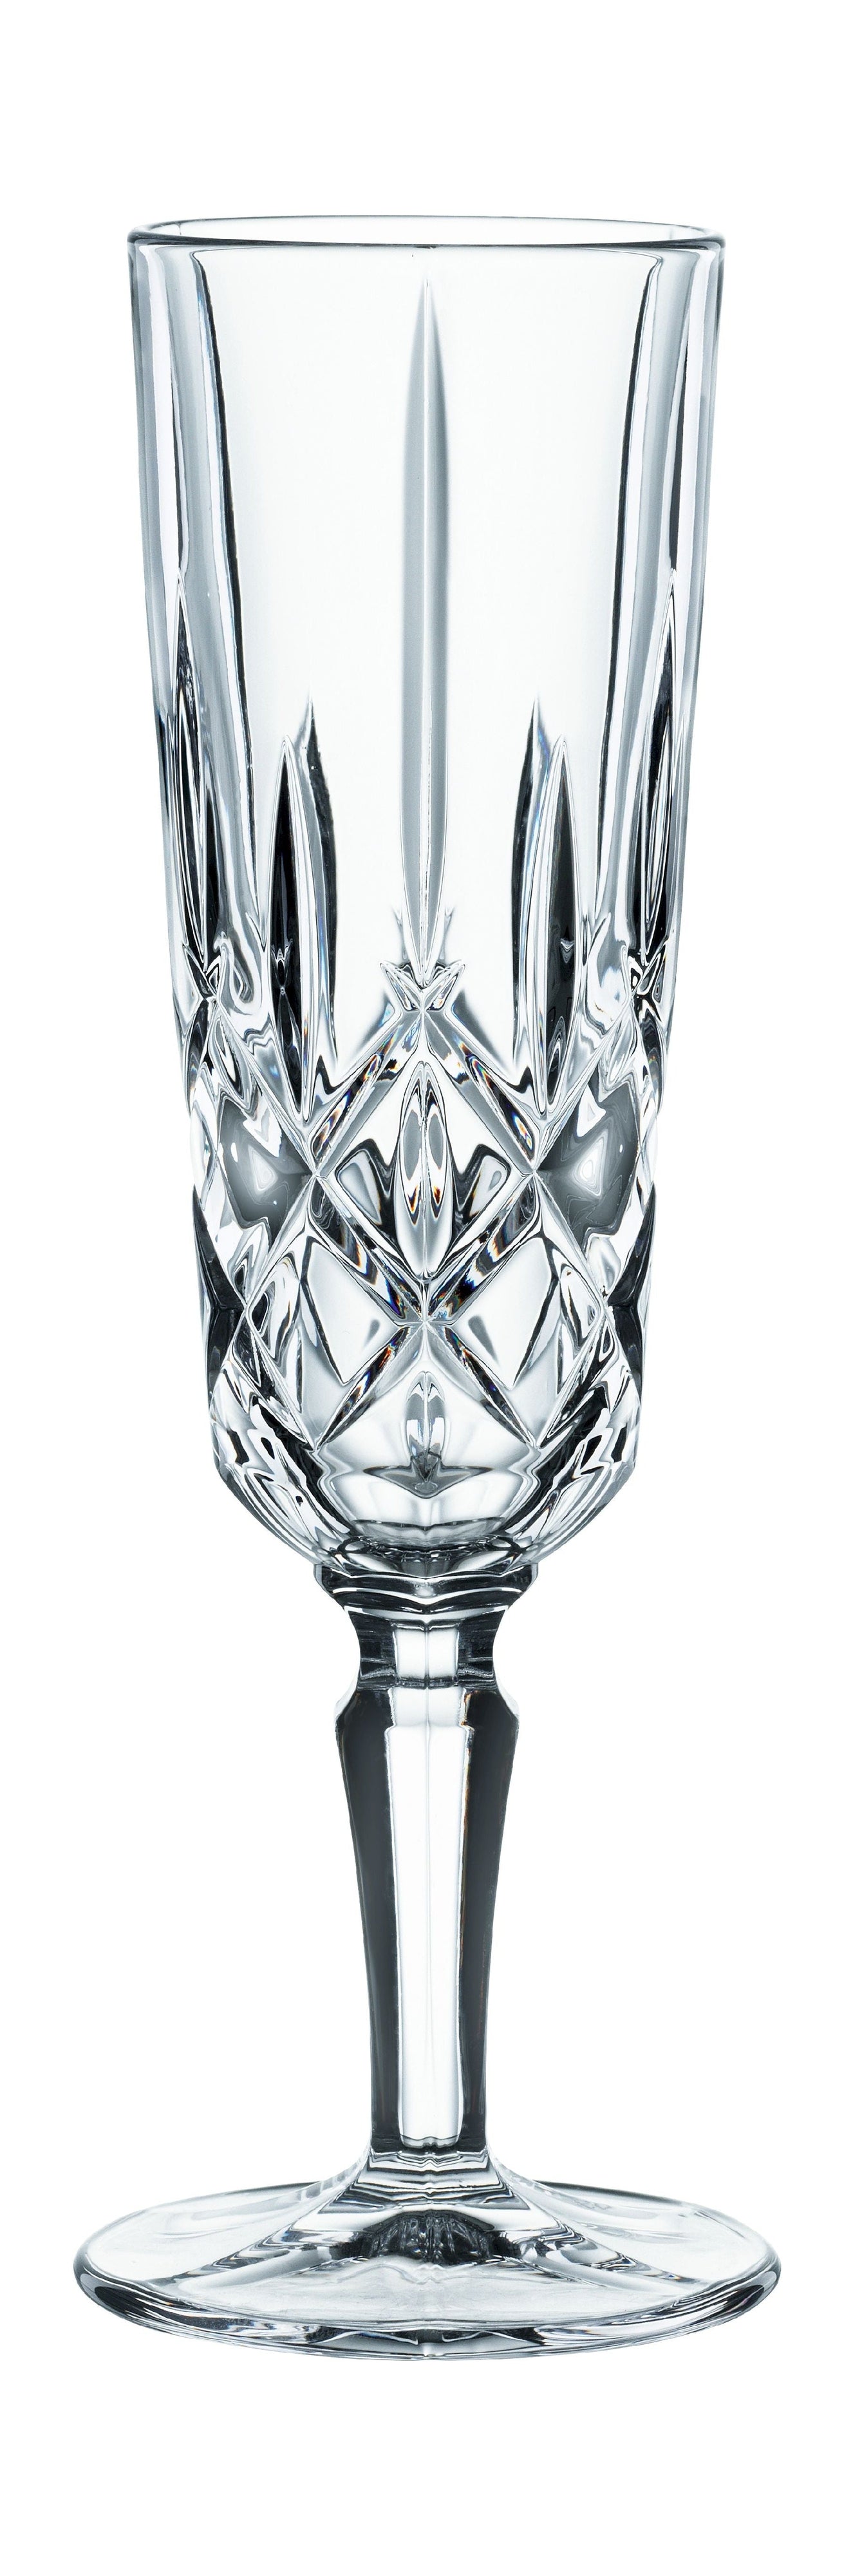 Nachtmann Noblesse Champagne Glass，4套